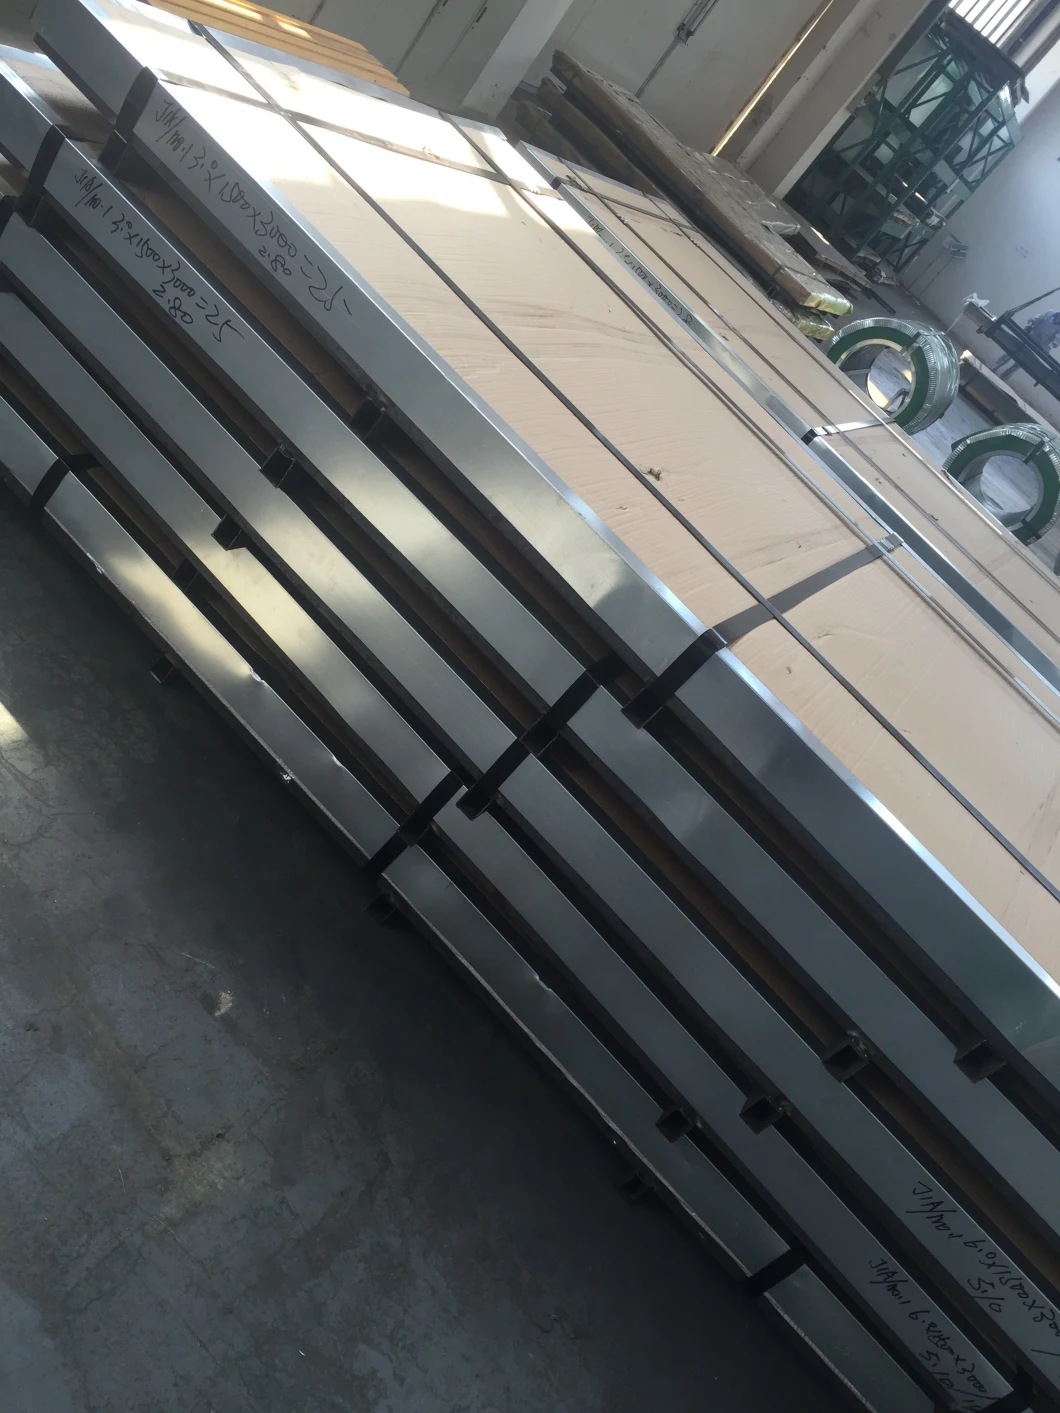 0.3mm 201 Stainless Steel Sheet